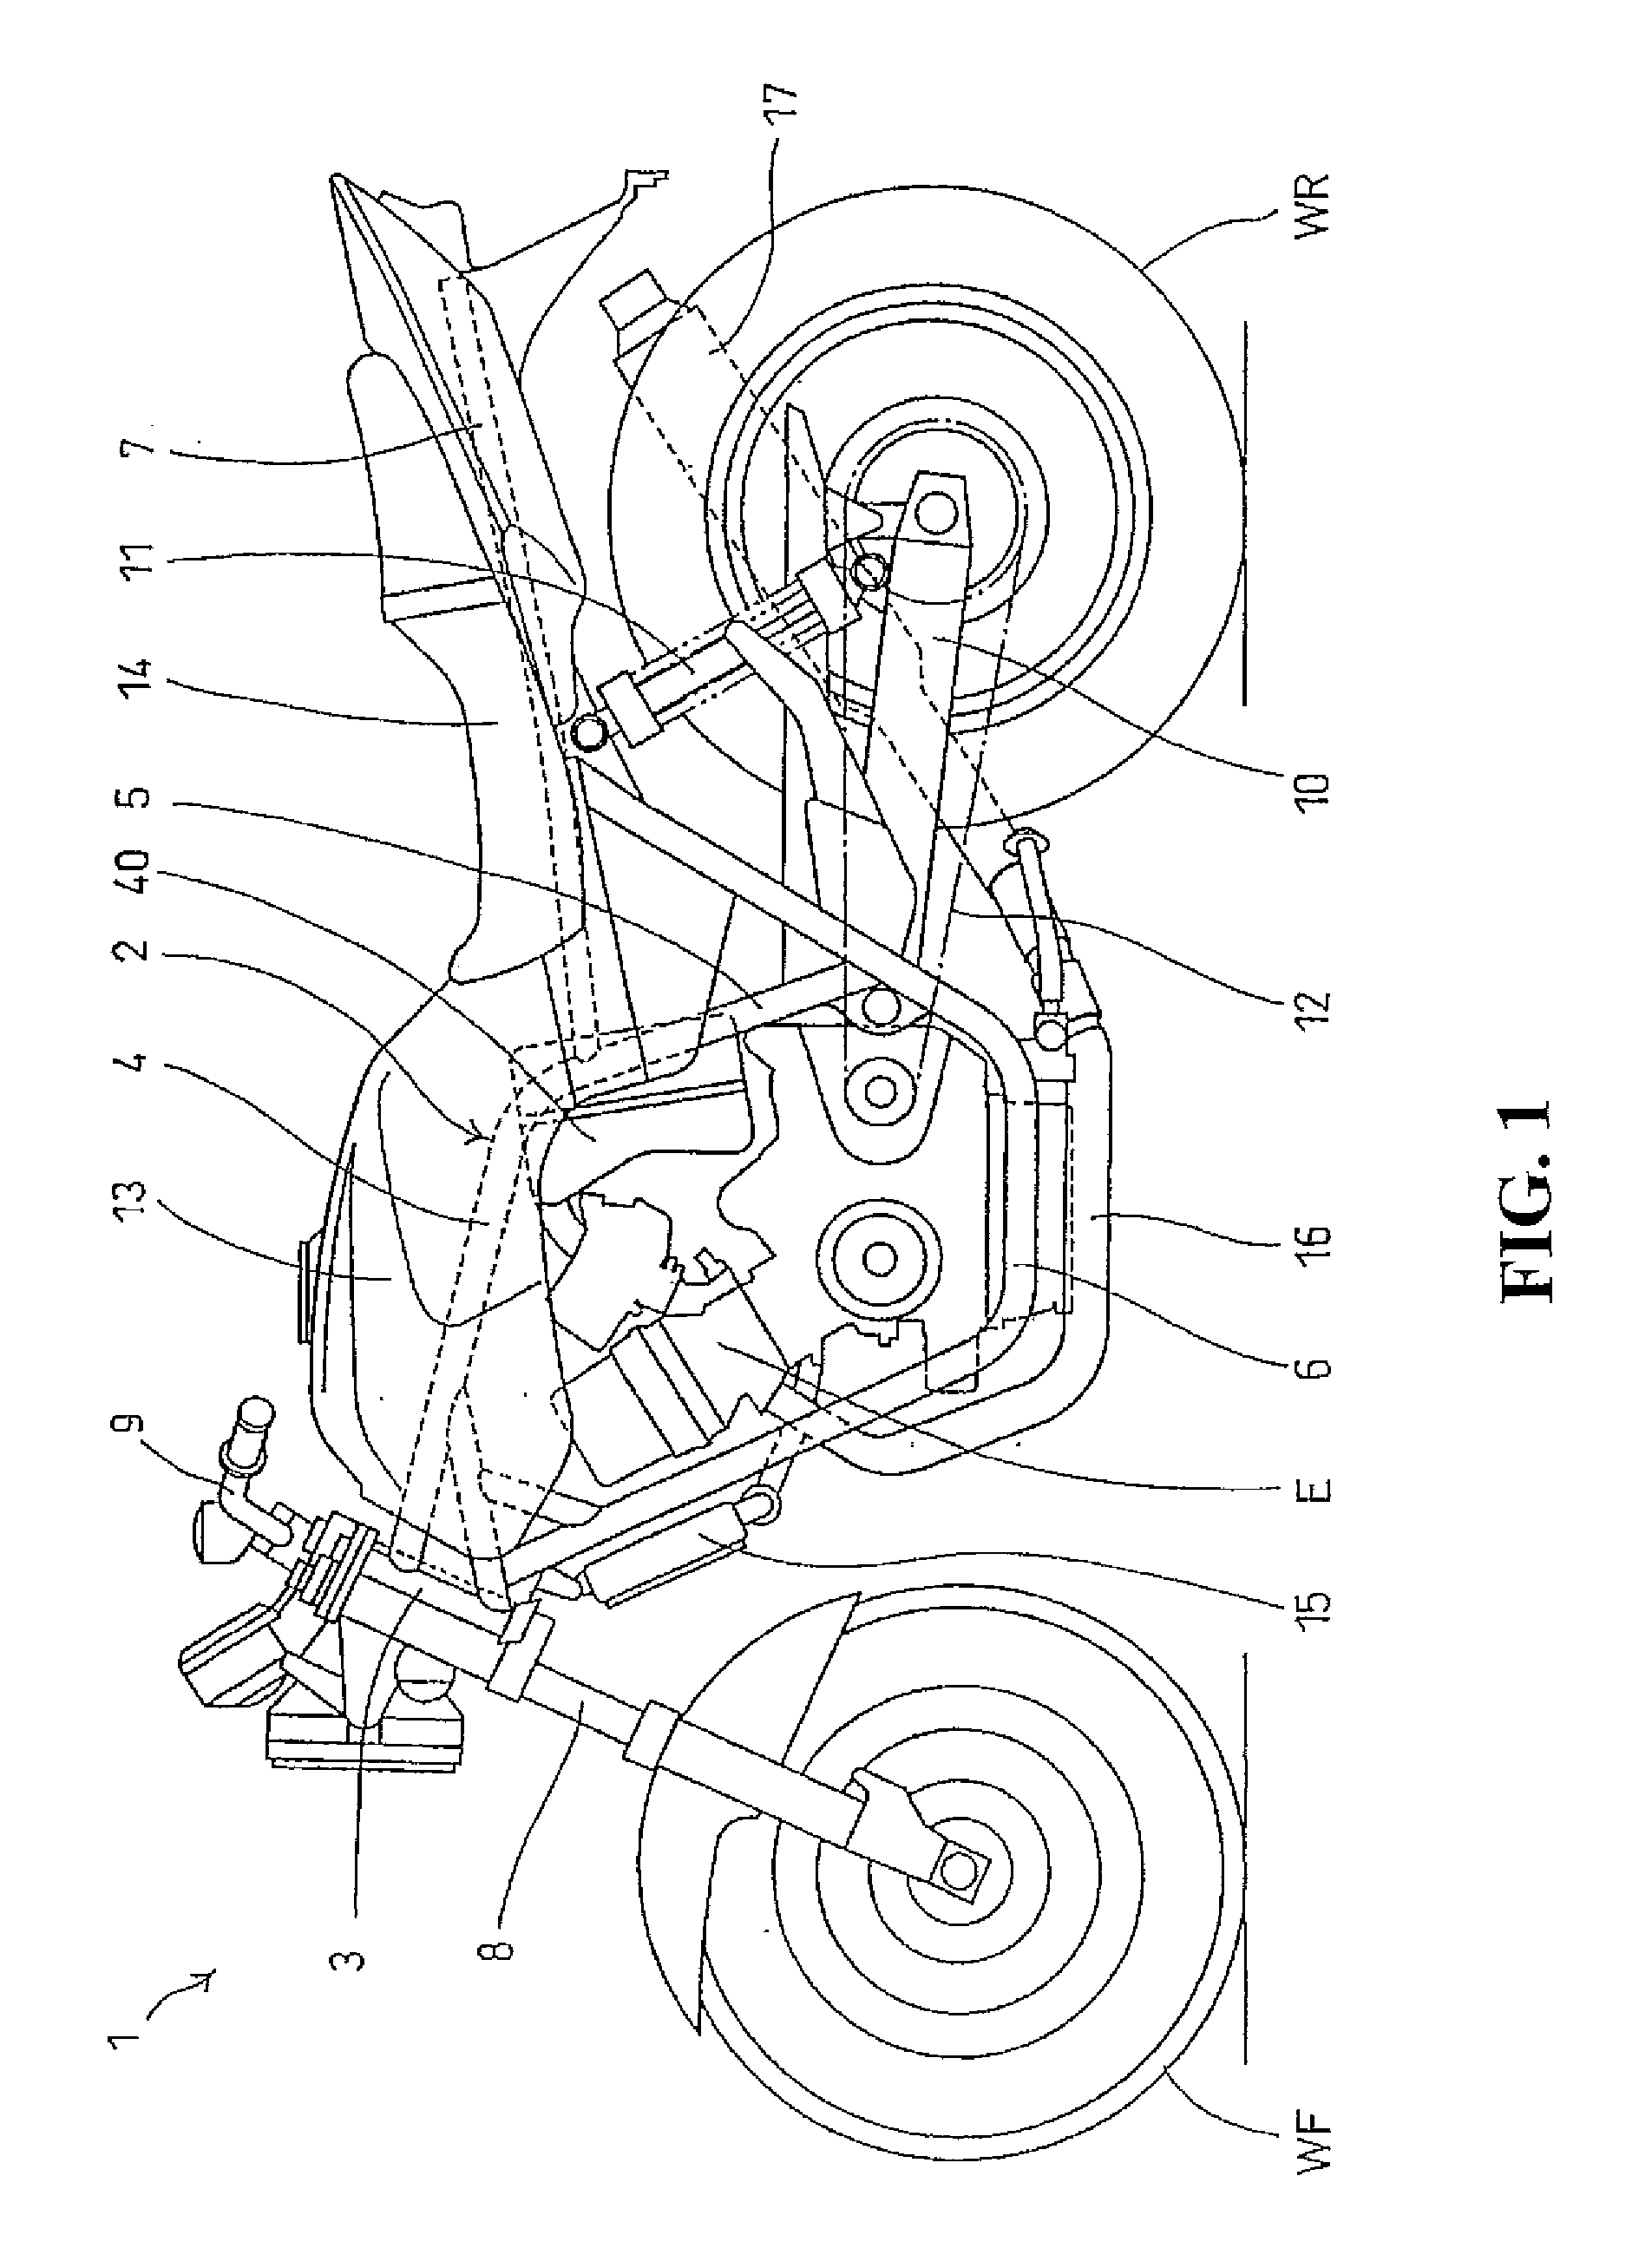 Engine with cylinder disabling mechanism